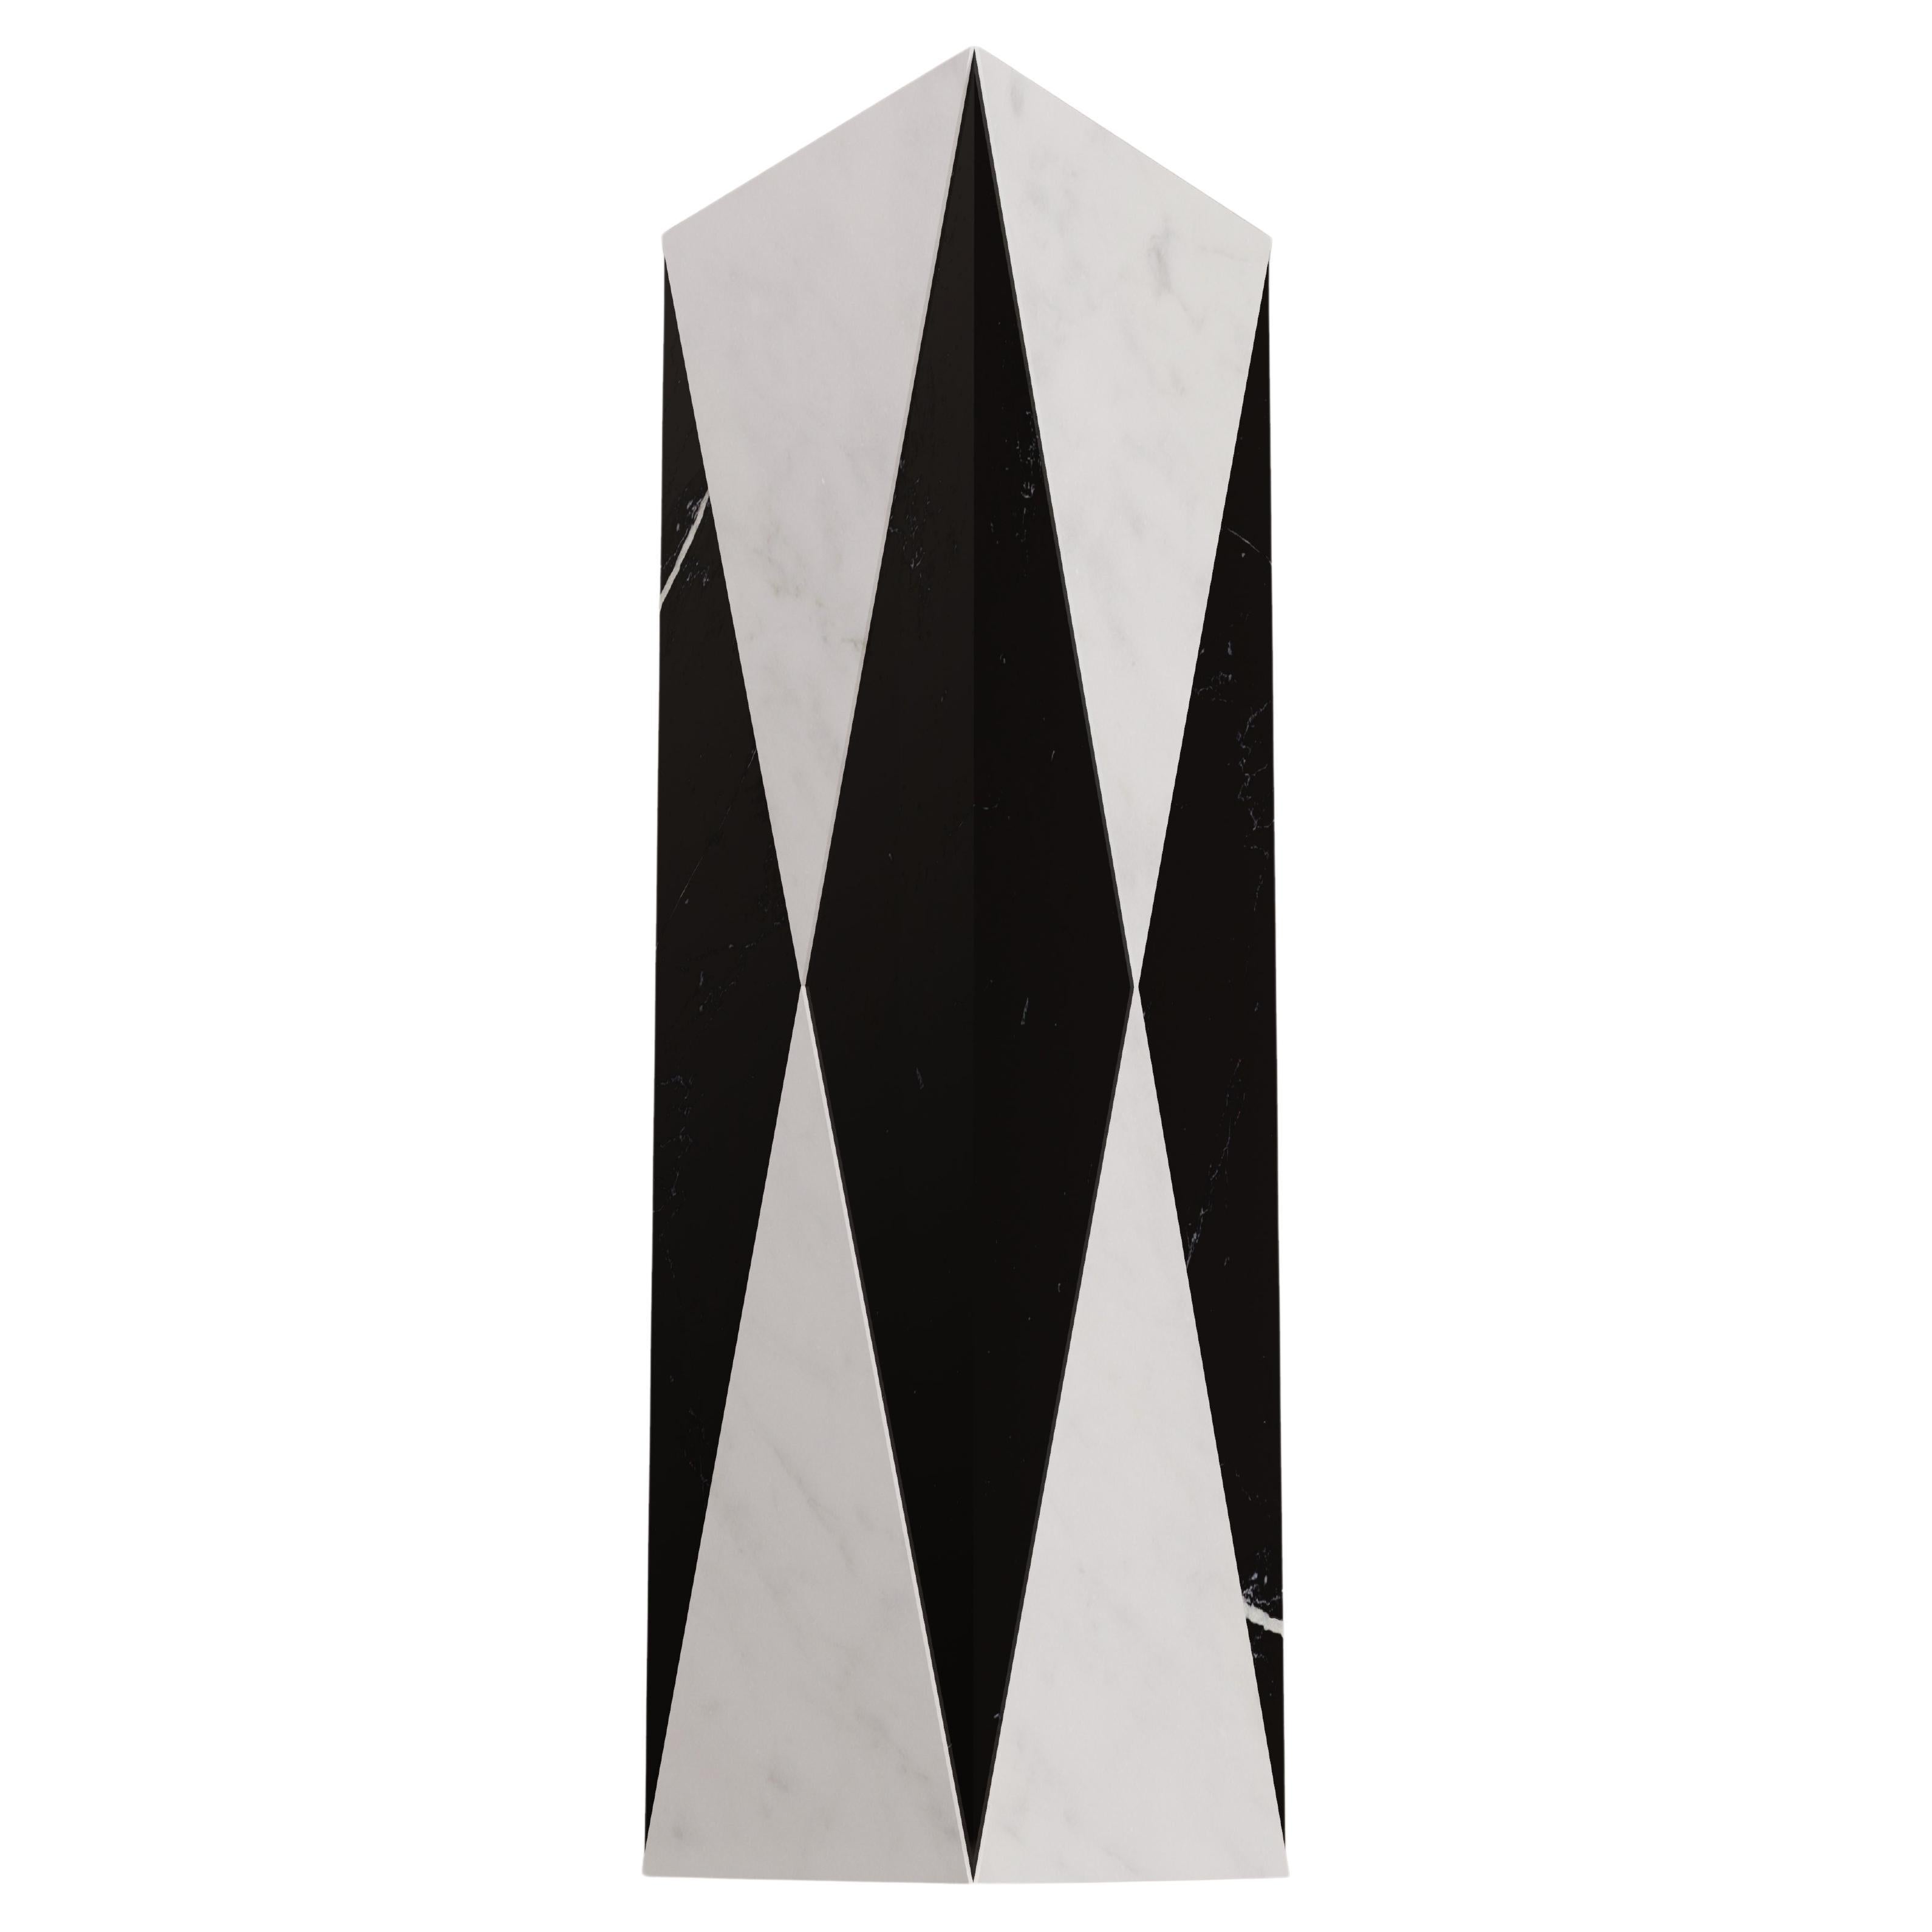 Triangular Vase in White Carrara Marble and Black Marquina by Carcino Design